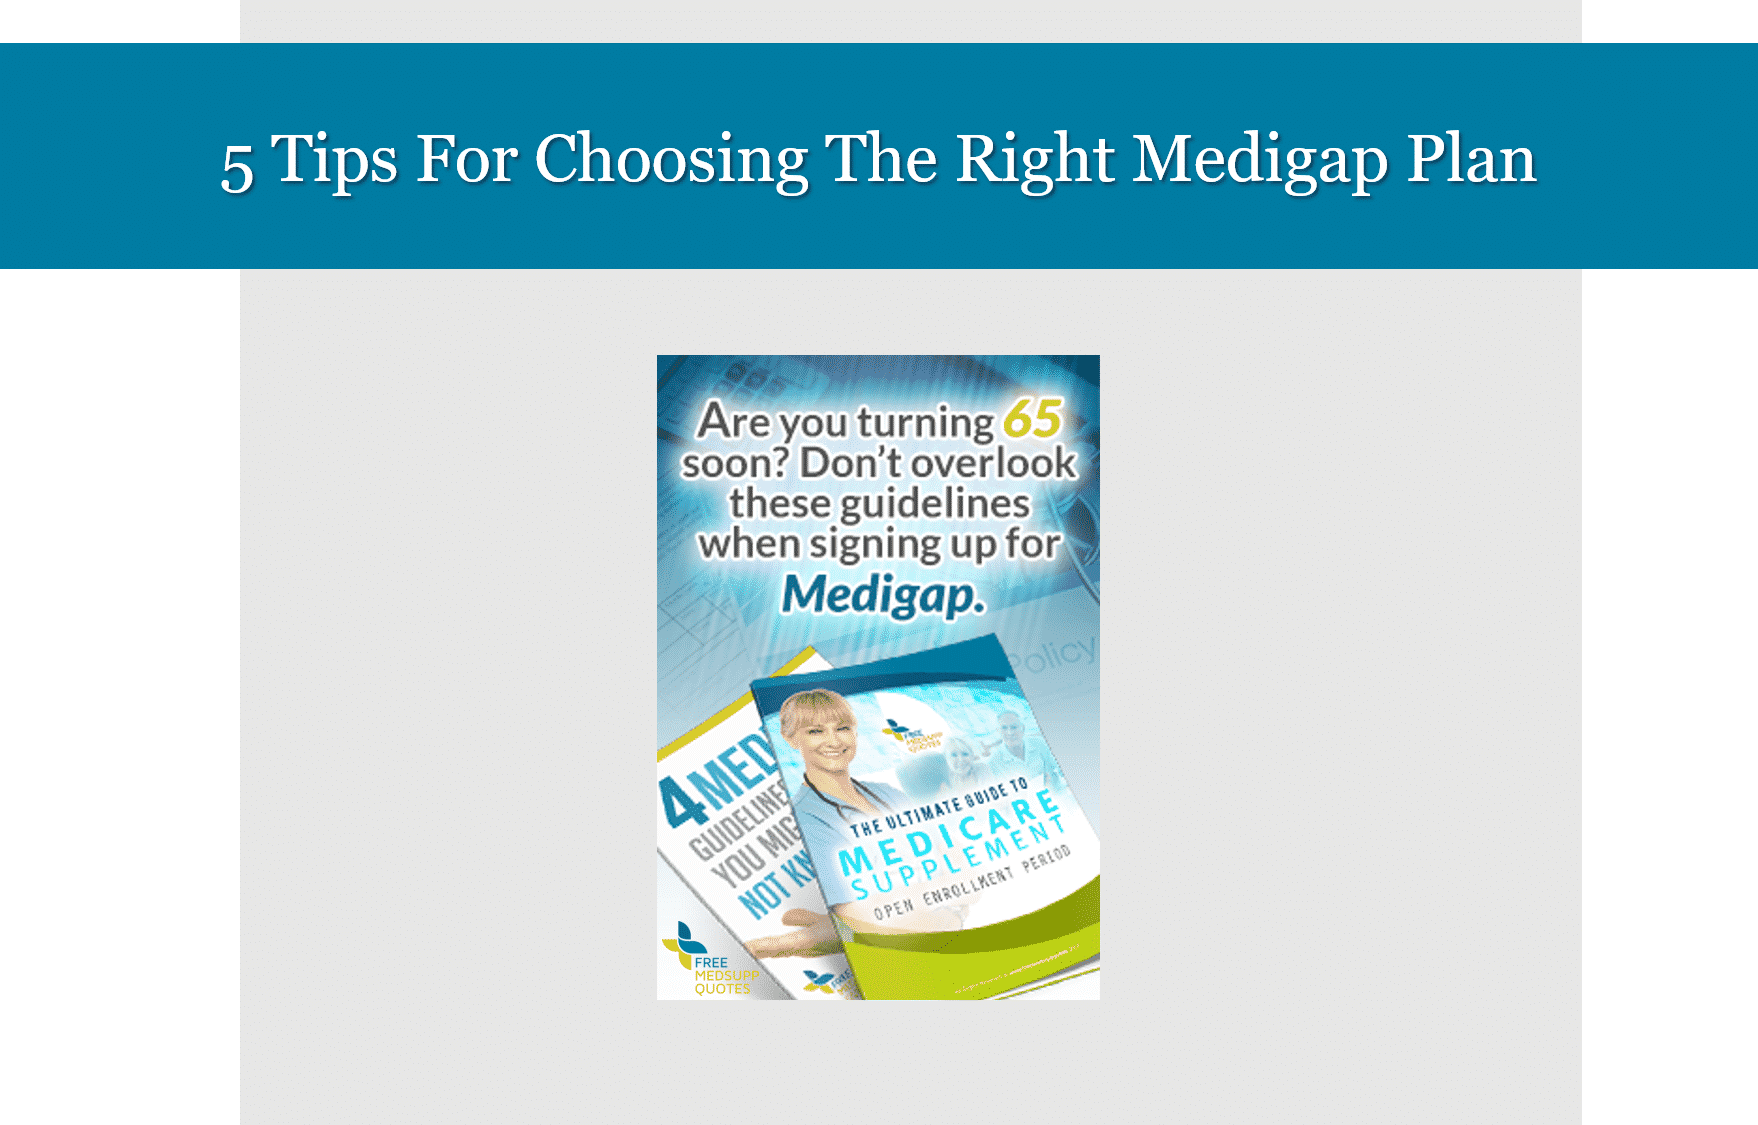 5 Tips For Choosing The Right Medigap Plan.Guest Blog by Leandro Mueller